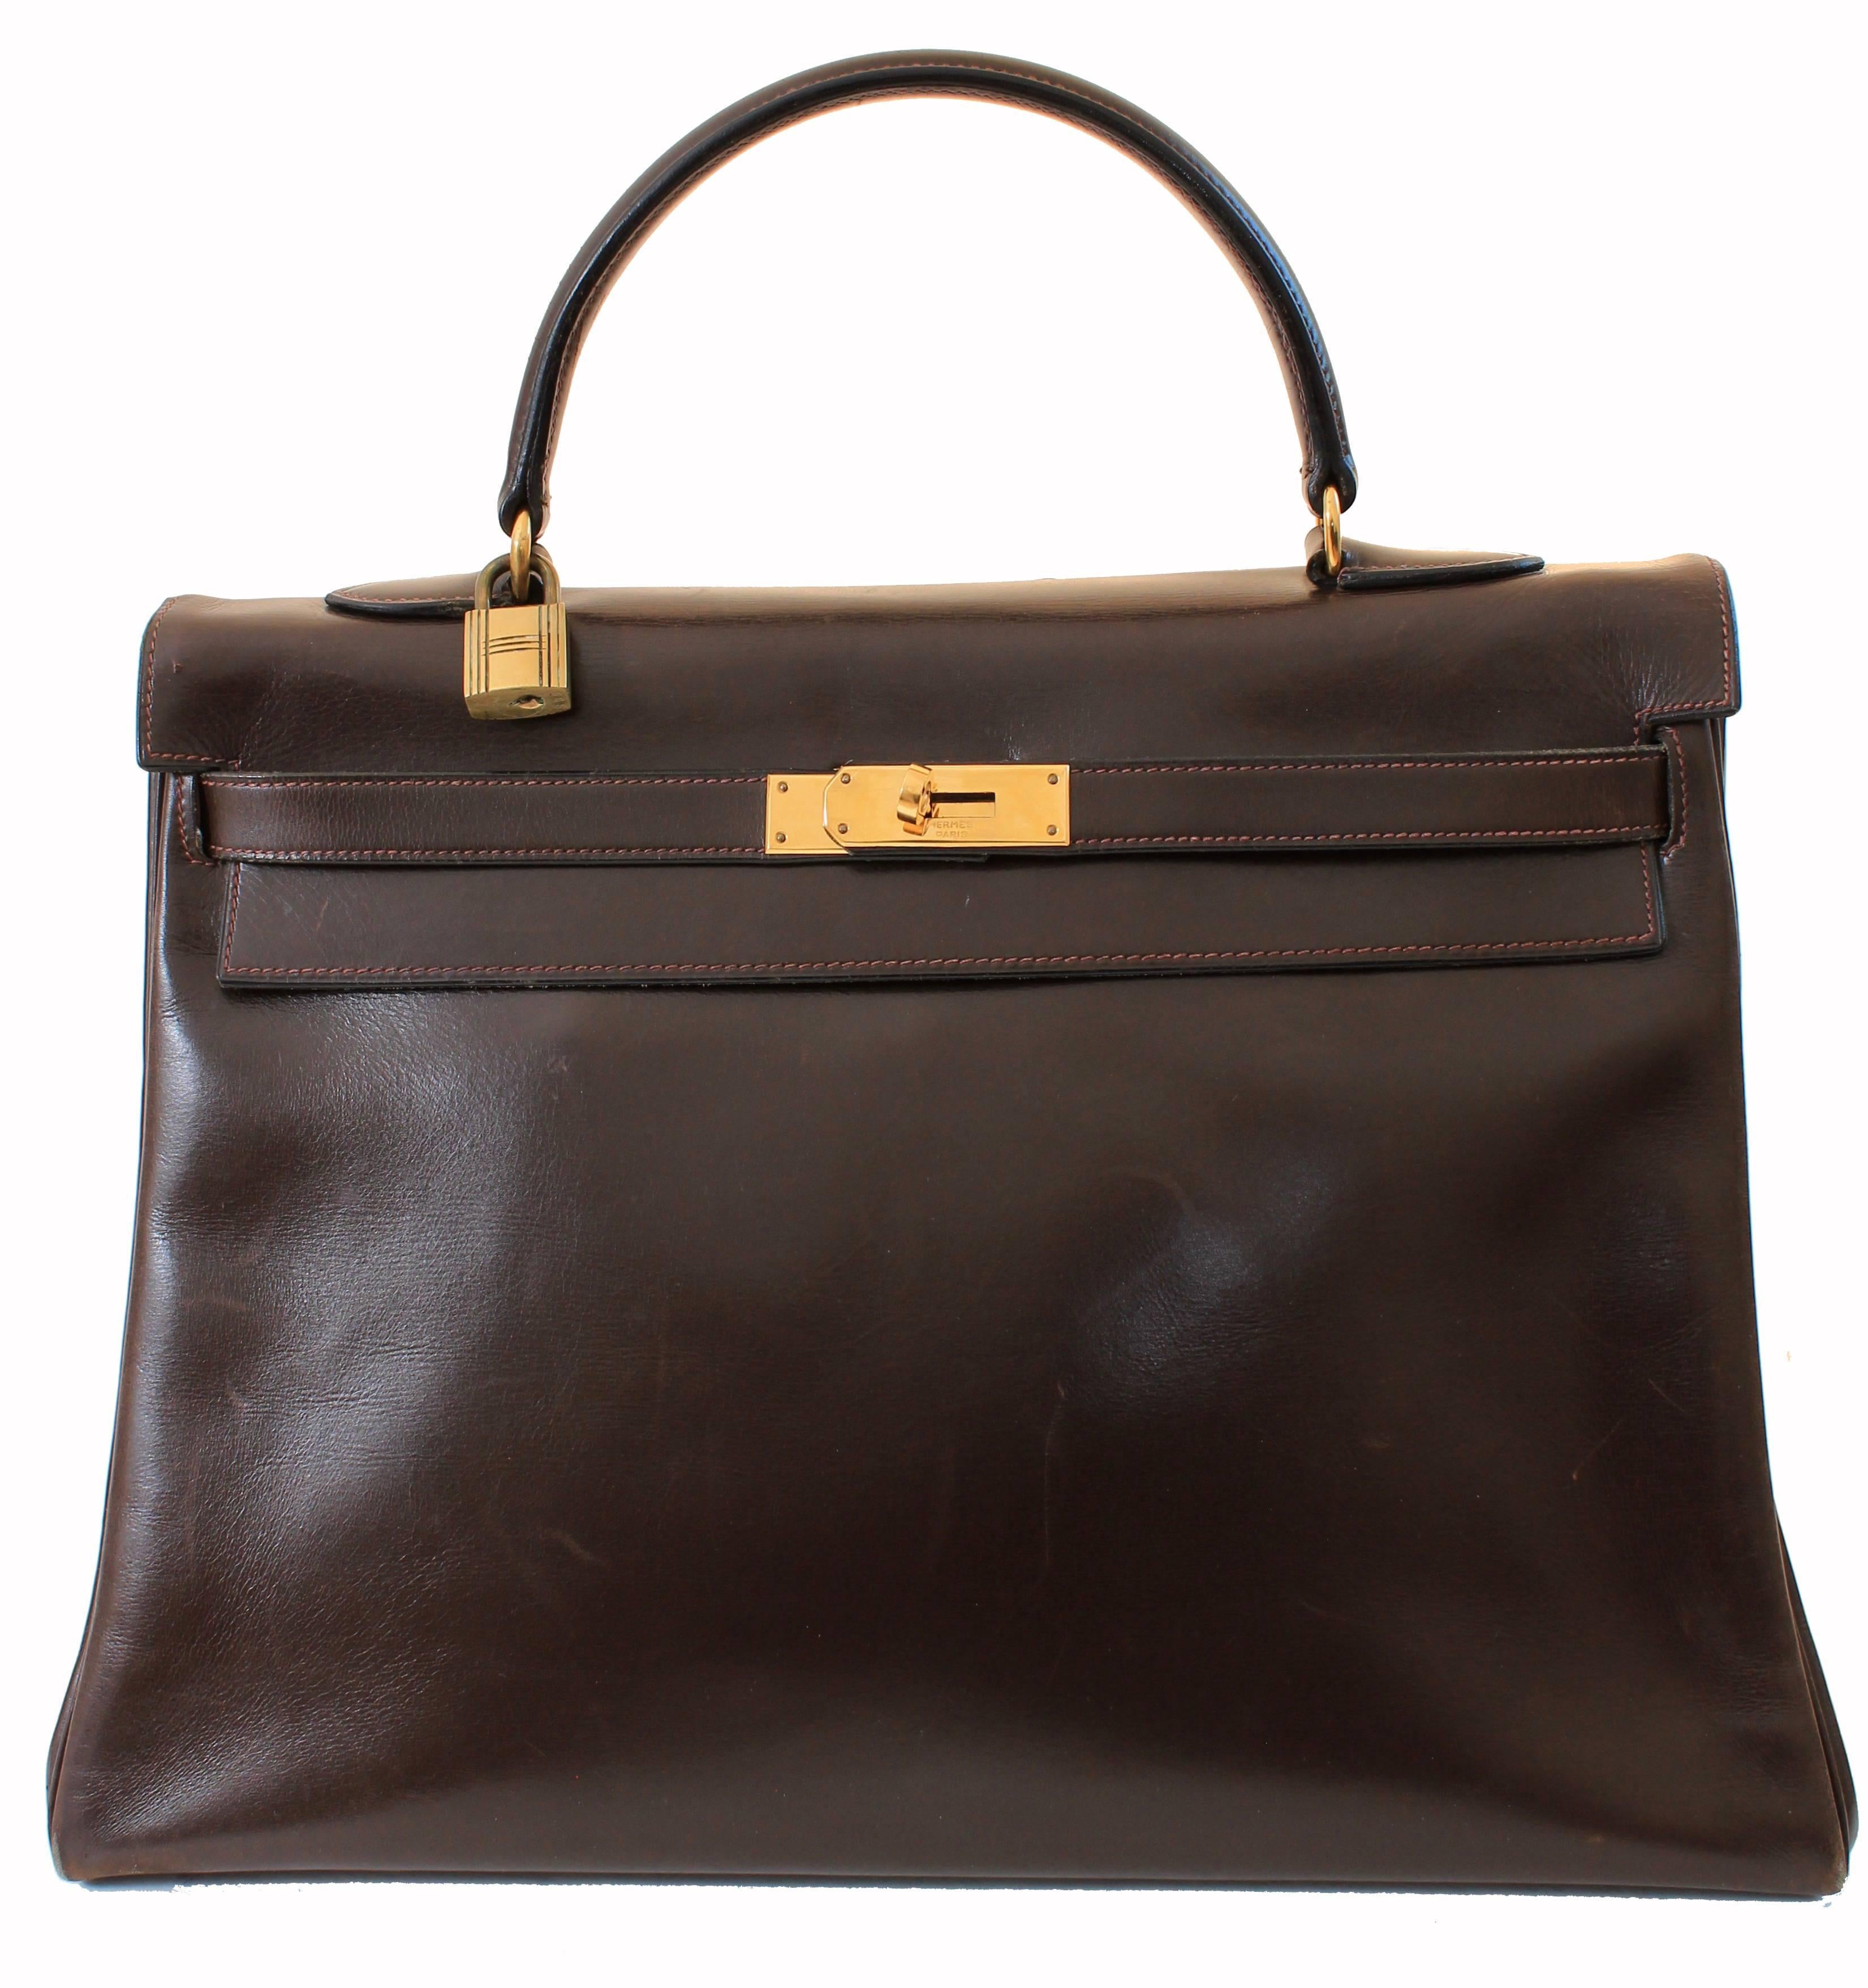 This fabulous handbag was made by Hermes in 1945.  Originally coined the Sac a Depeches - this piece was made about 12 years before Grace Kelly wore the style that we now know as the Kelly bag.  Made from Hermes signature box leather in a deep brown